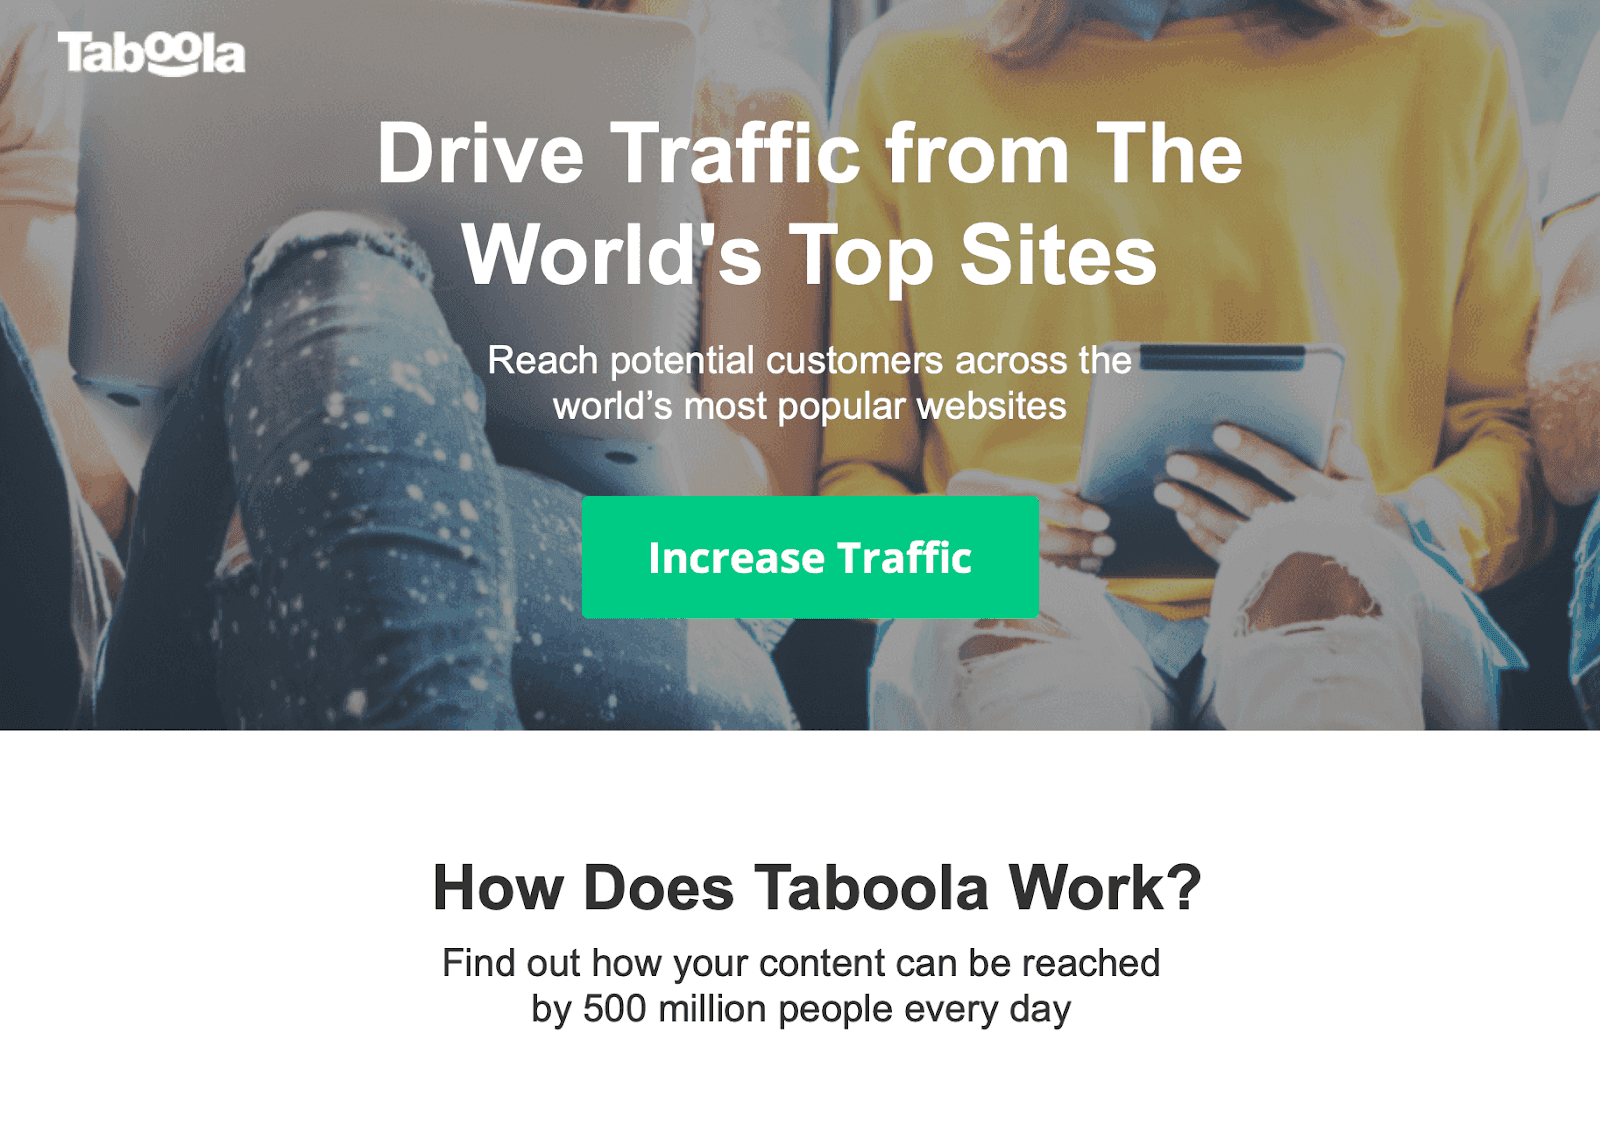 "Drive Traffic from The World's Top Sites" with "Increase Traffic" call to action